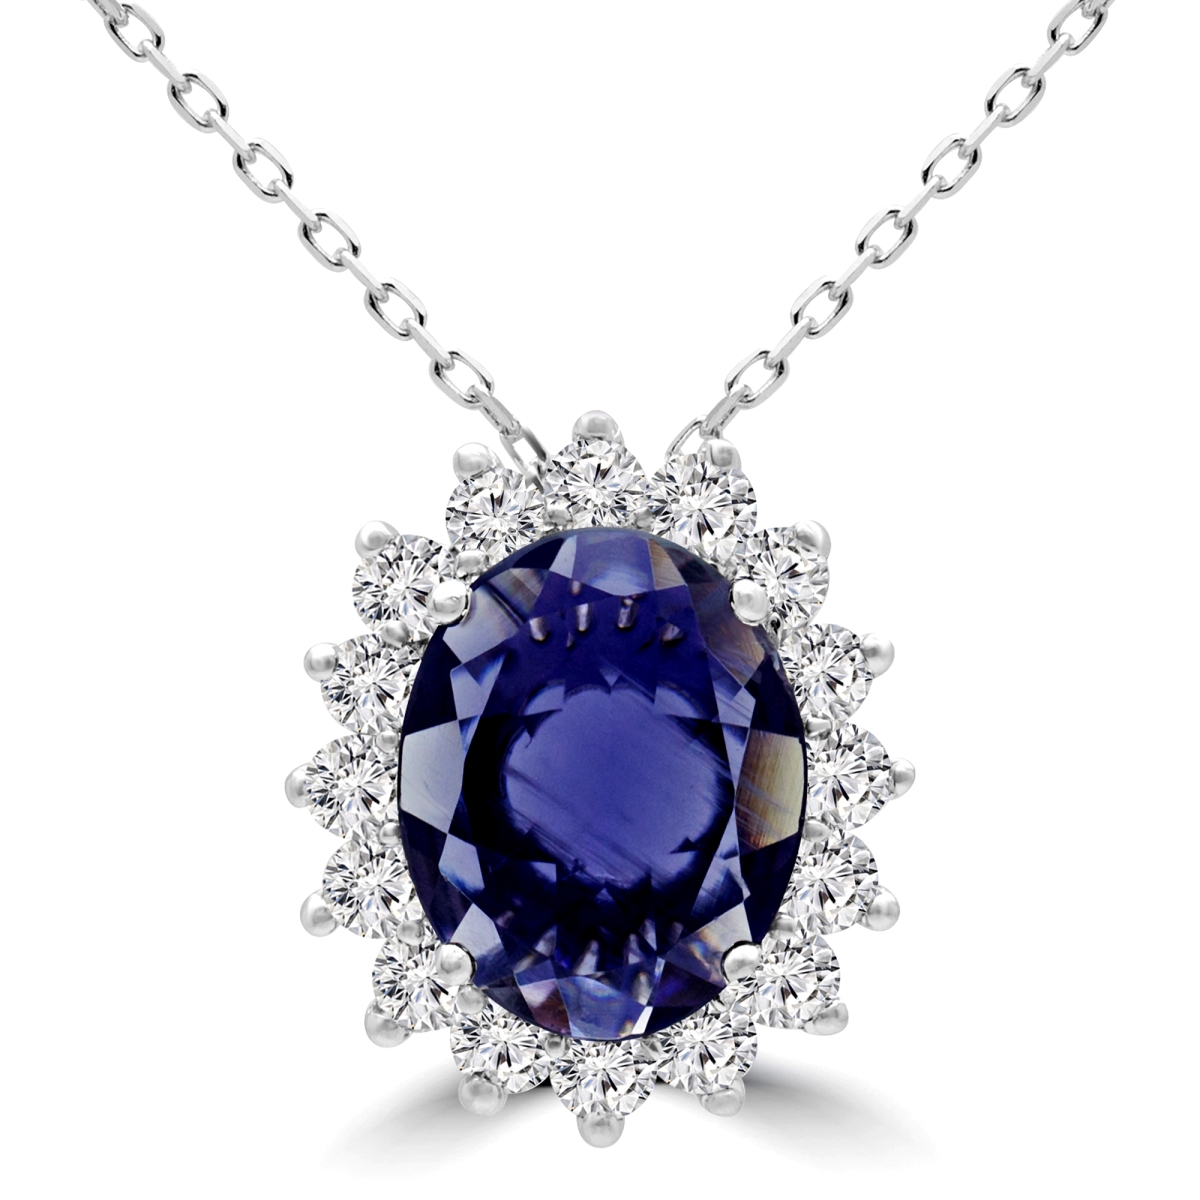 Mdr170162 1.6 Ctw Oval Purple Iolite Halo Solitaire With Accents Pendant Necklace In 14k